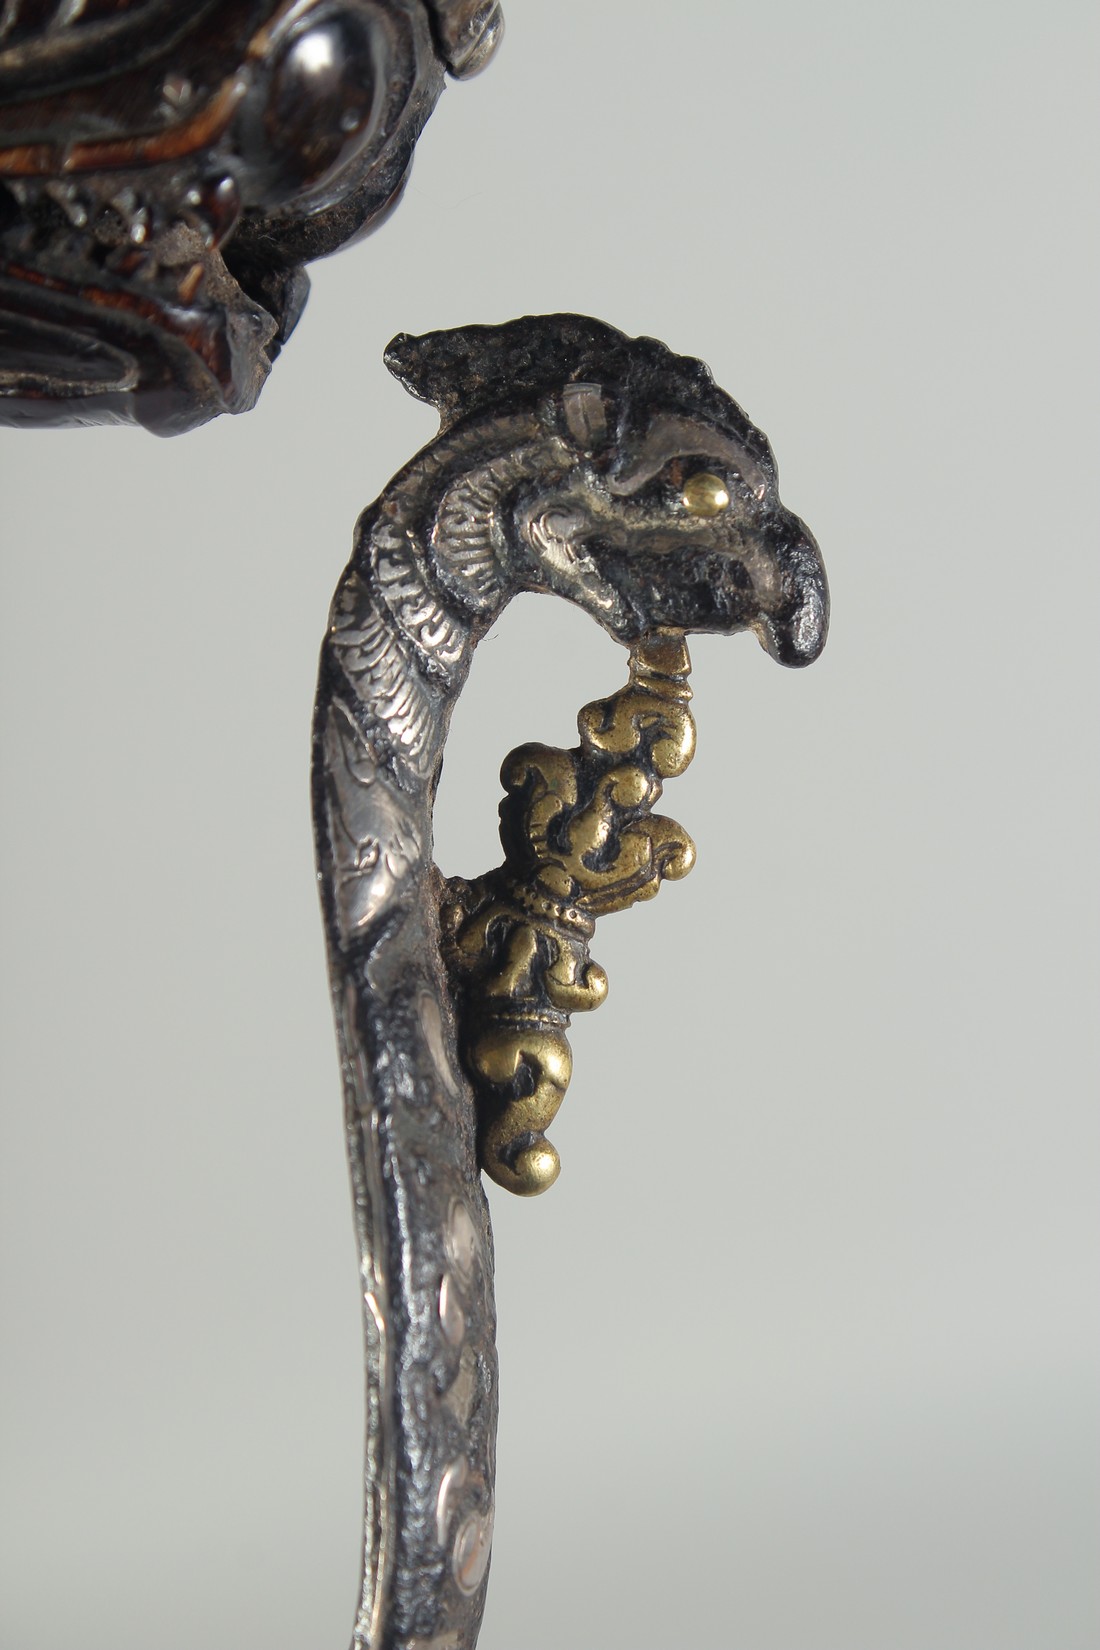 A RARE 17TH CENTURY CEYLONESE SRI LANKAN KASTANE SWORD, with carved silver mounted rhino horn handle - Image 5 of 8